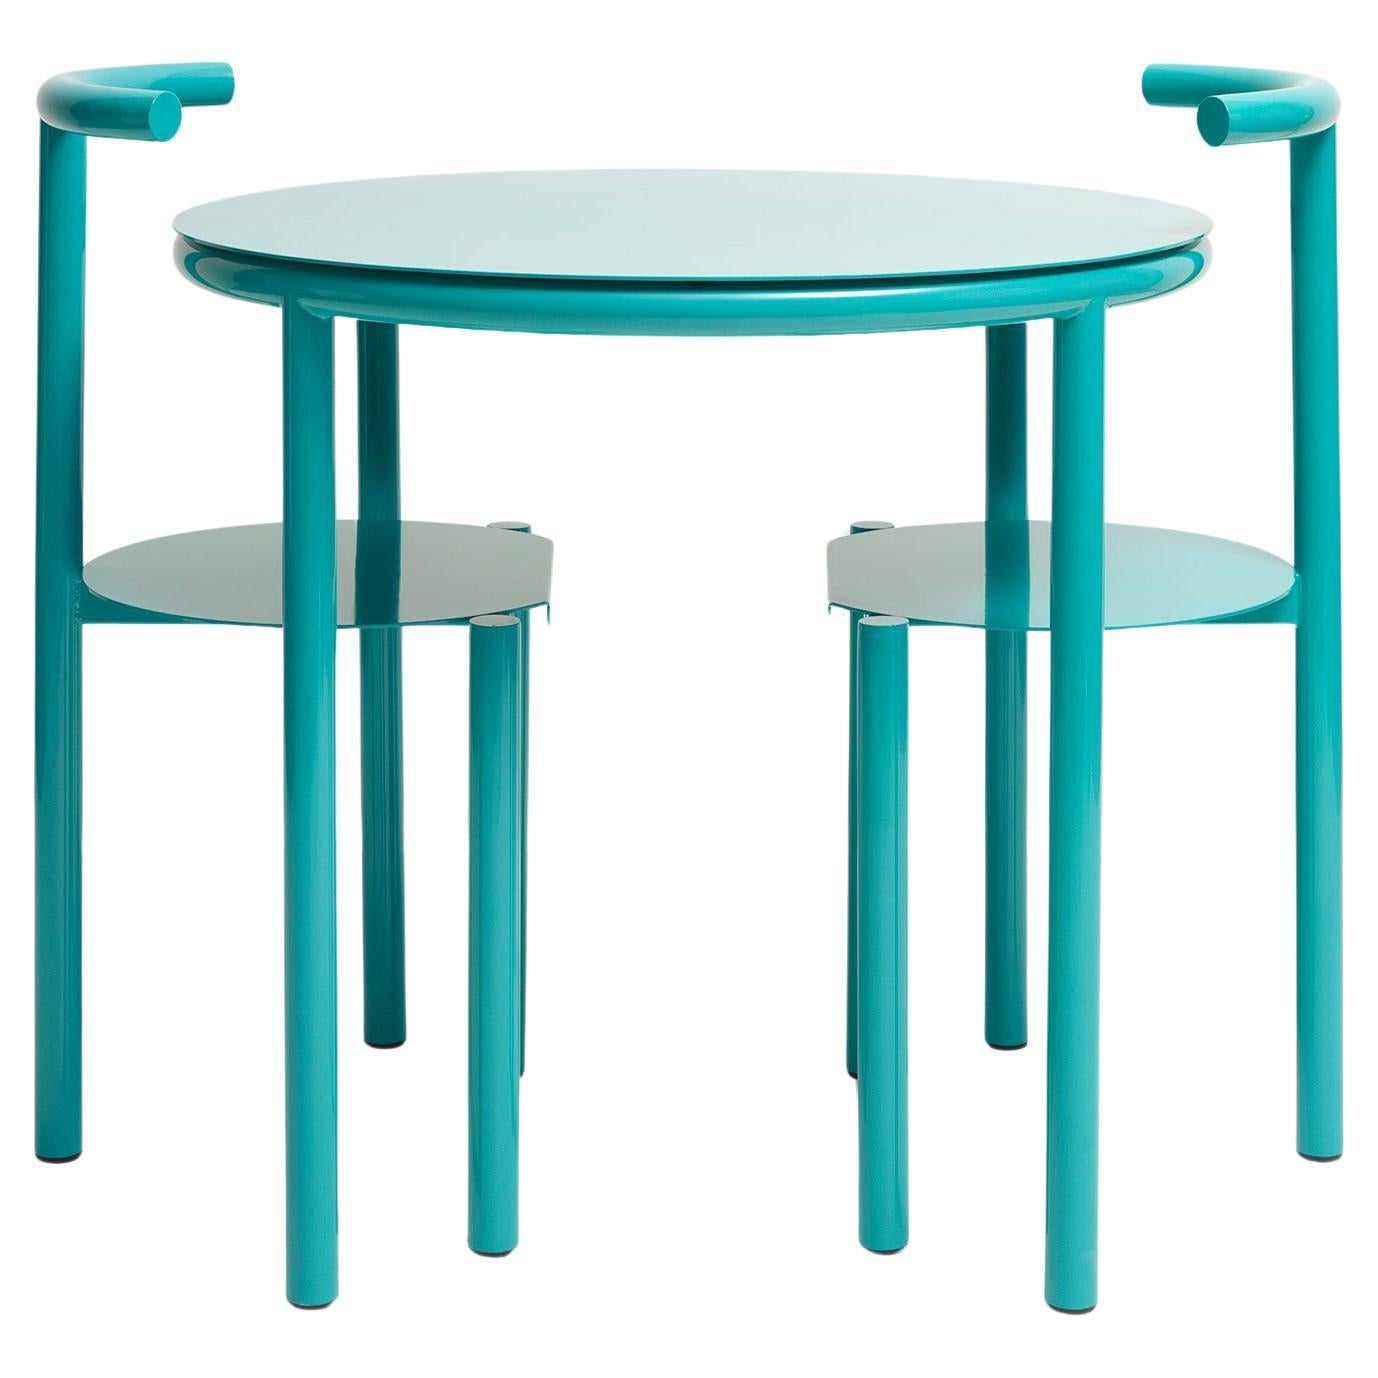 Ring Table with 2 chairs- Minimal Coloured Tubular Metal Dinning / Cafe Table